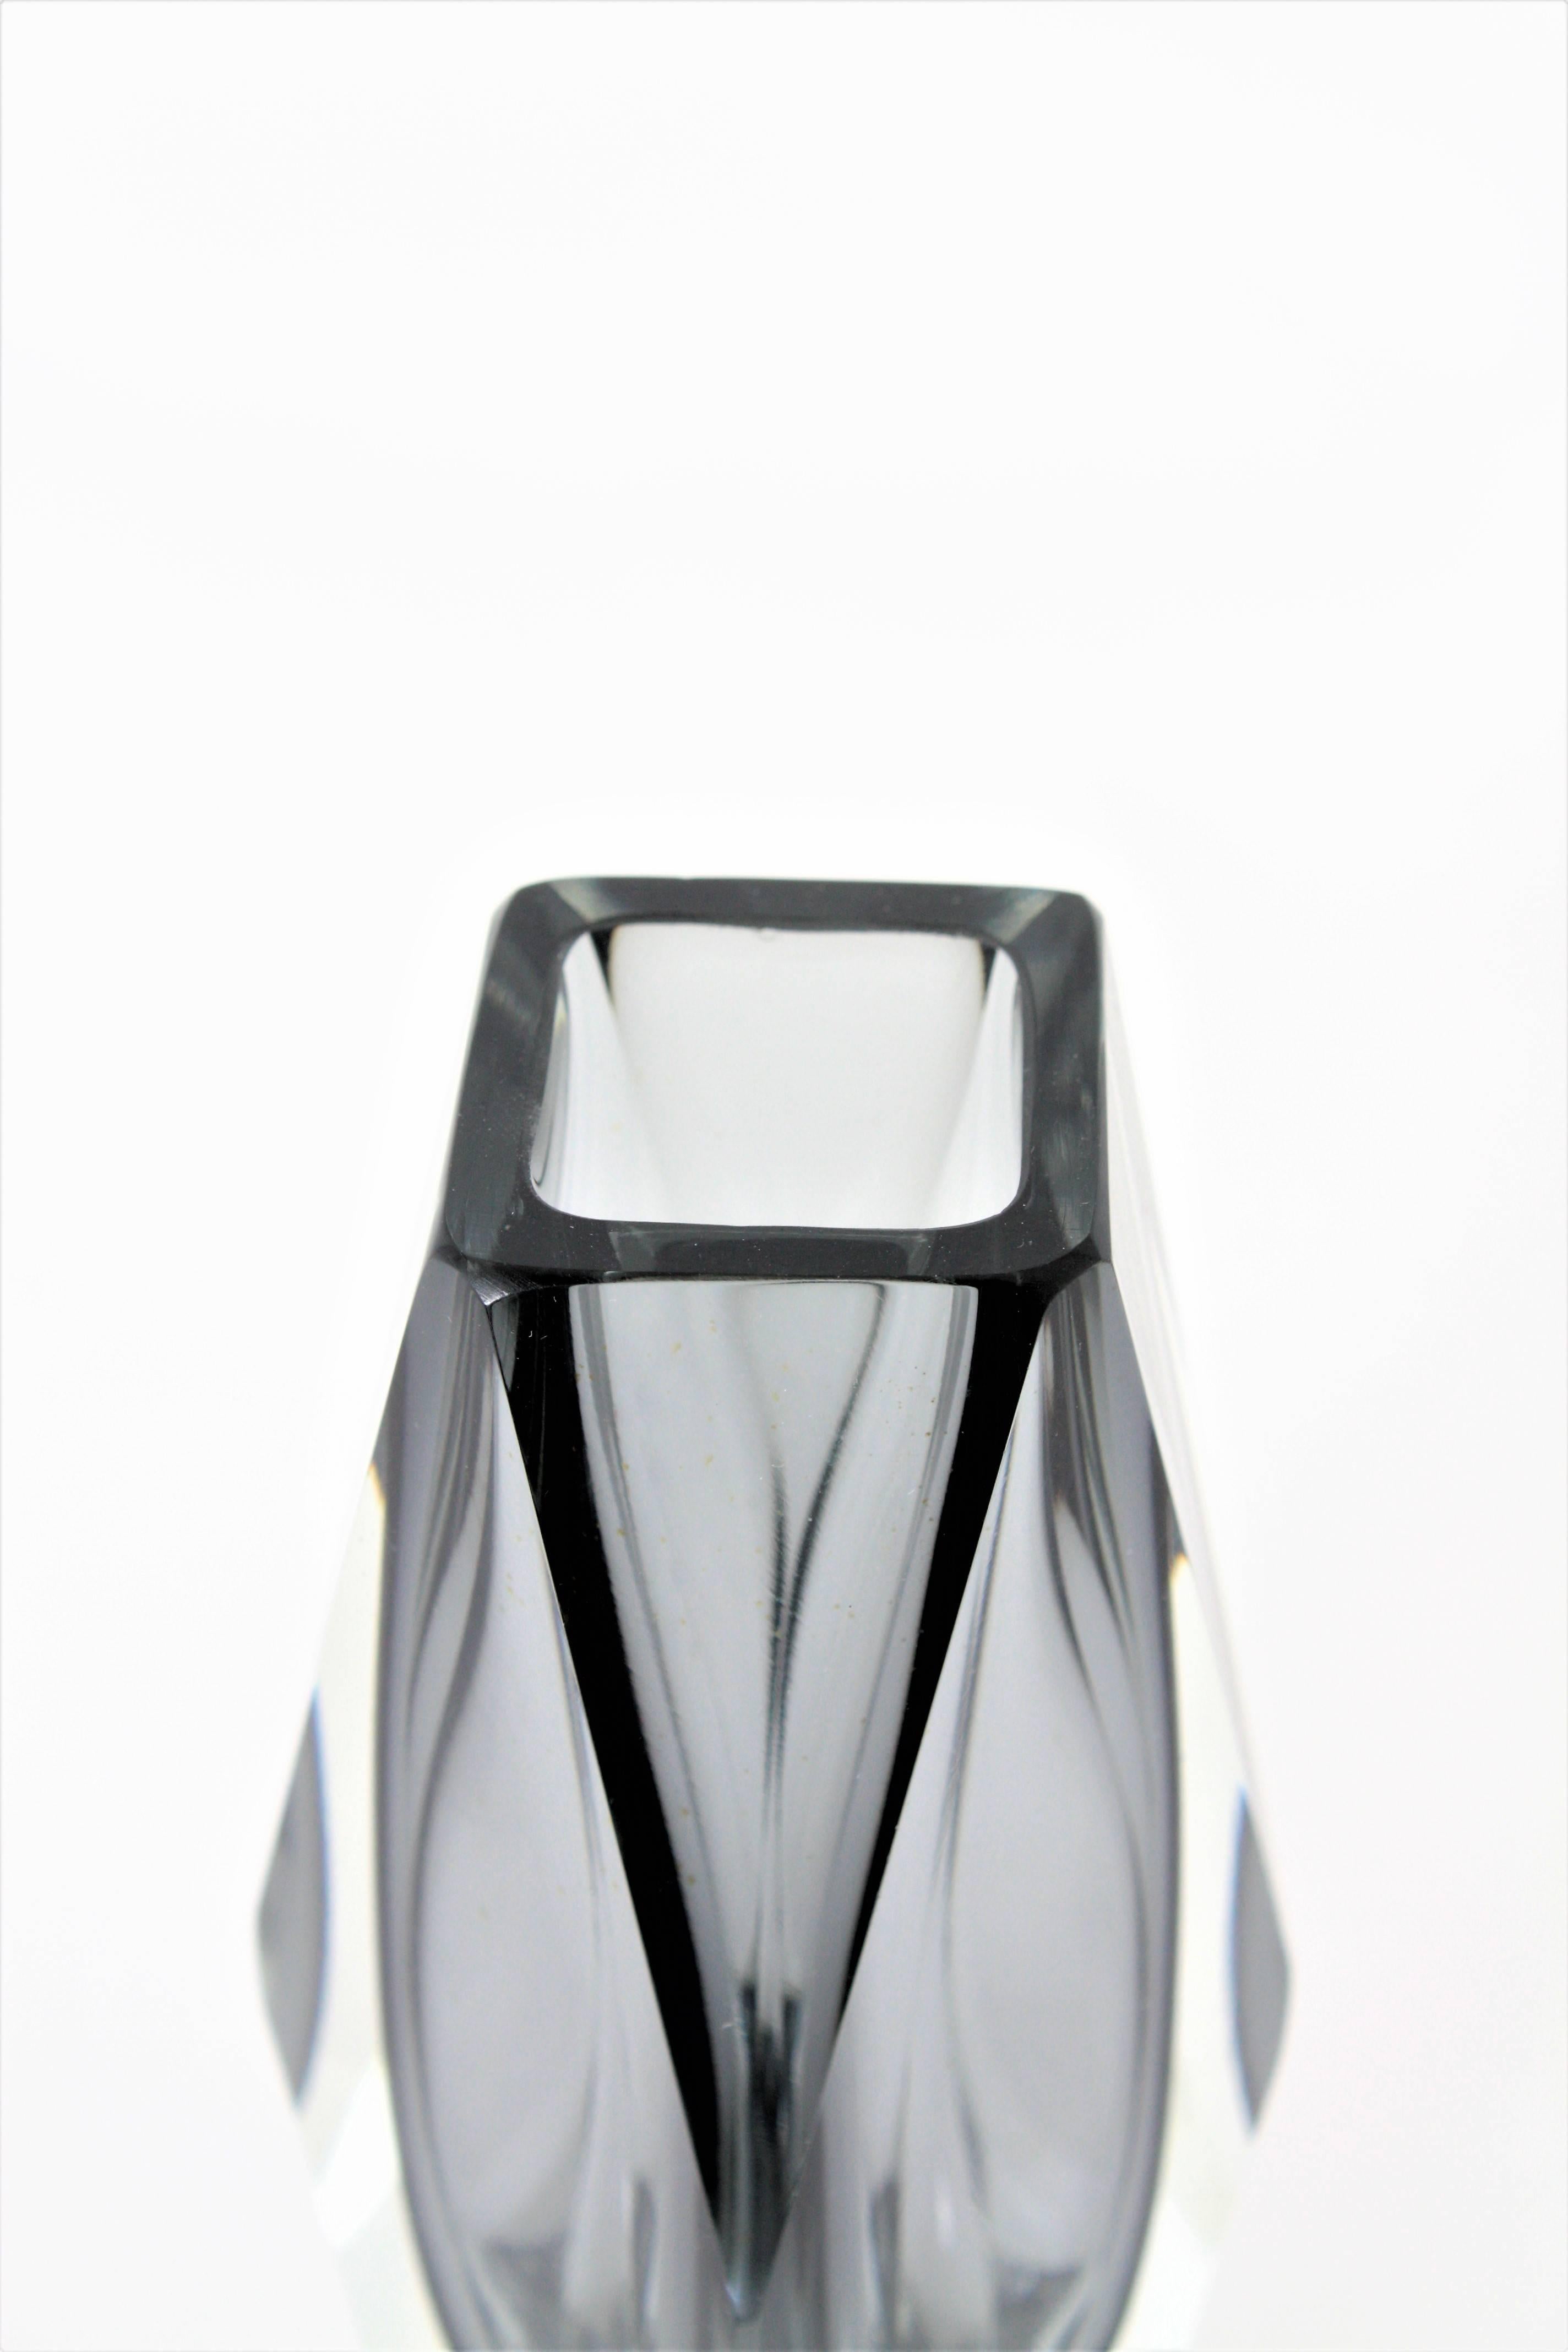 Mid-20th Century Midcentury Mandruzzato Smoked Grey and Clear Faceted Sommerso Murano Glass Vase